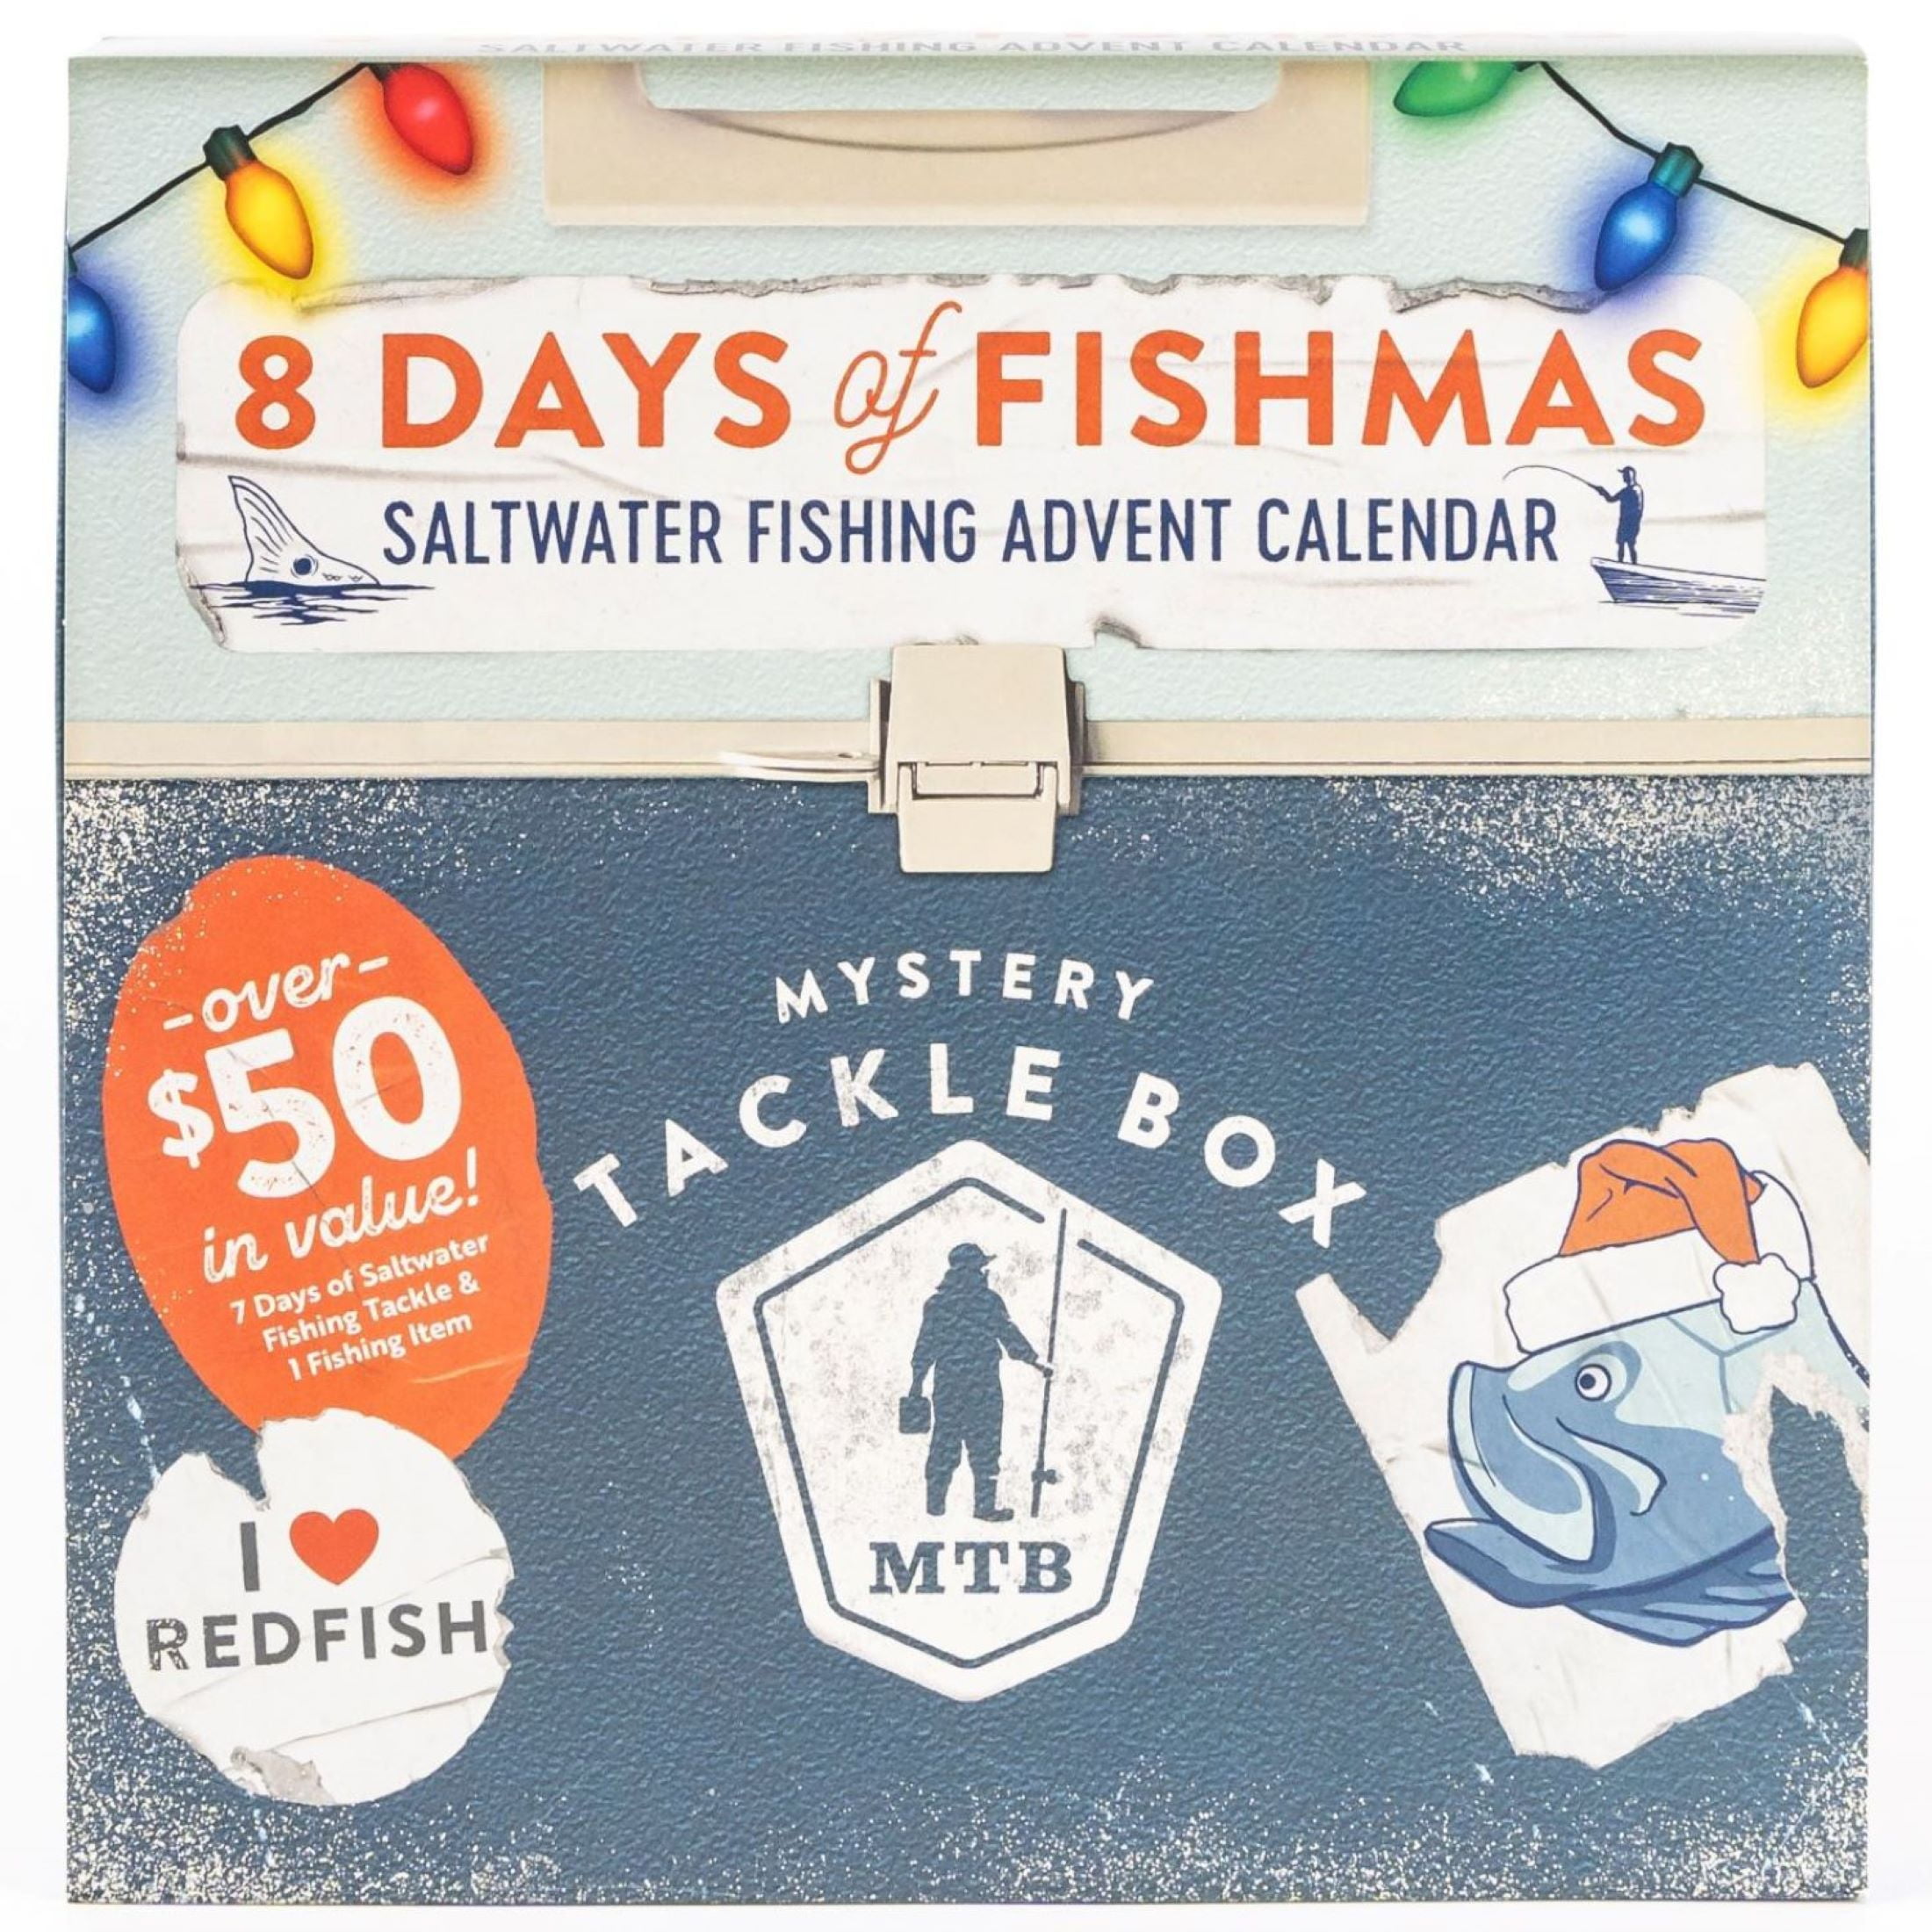 MYSTERY TACKLE BOX SERVES UP CHRISTMAS MIRACLES WITH 12 DAYS OF